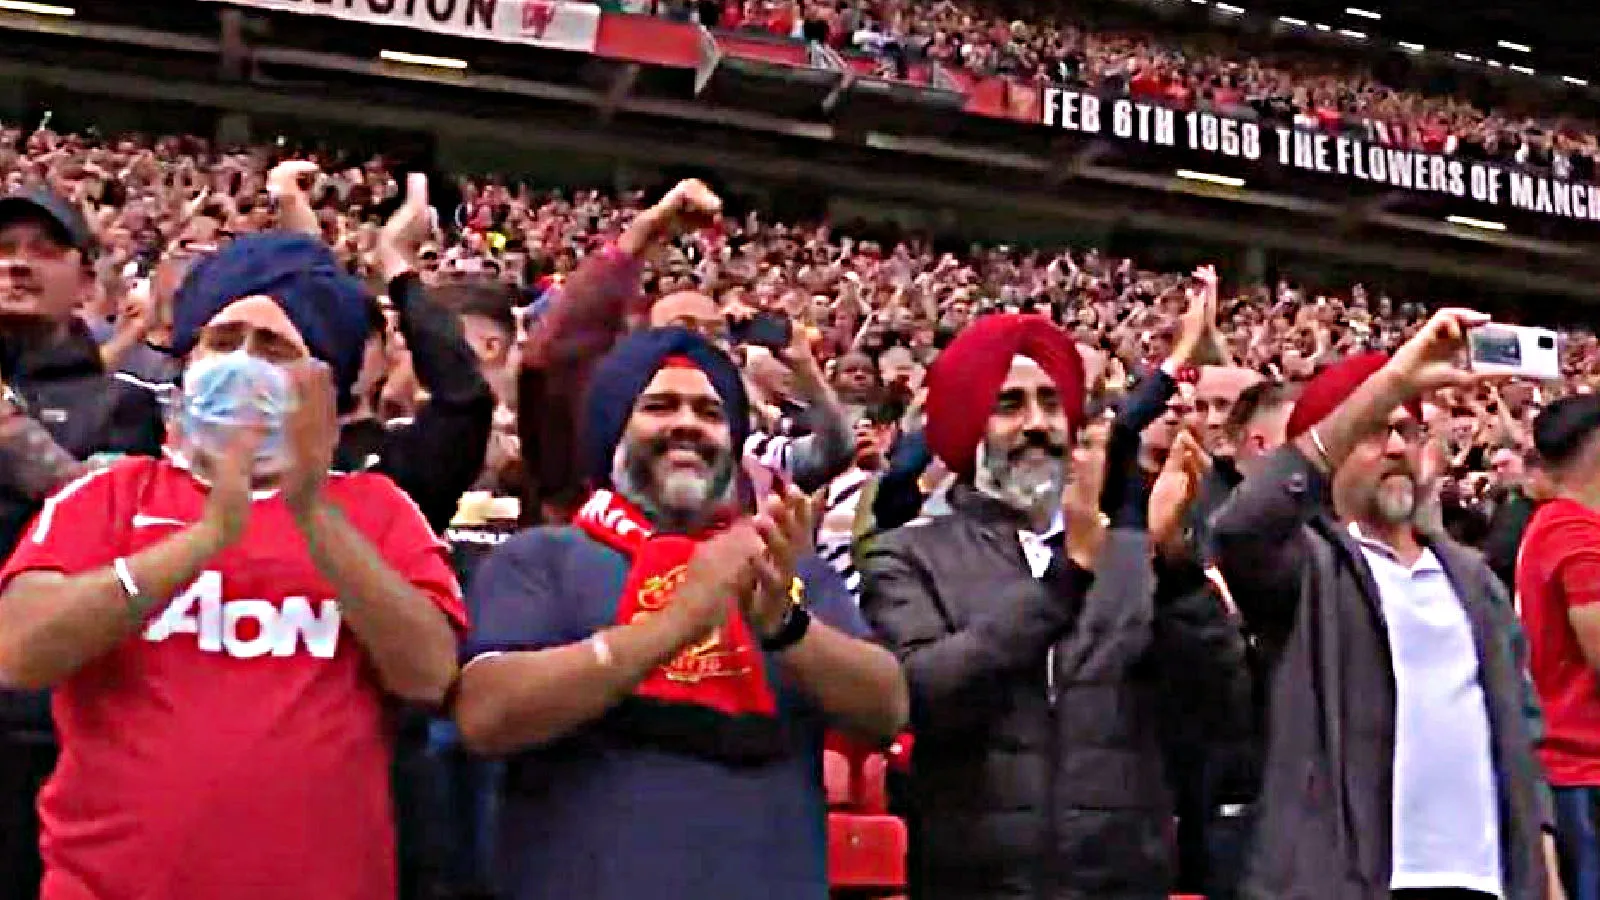 The 'Old Trafford Sikhs' made a comeback during Manchester United's 5-1 win against Leeds United